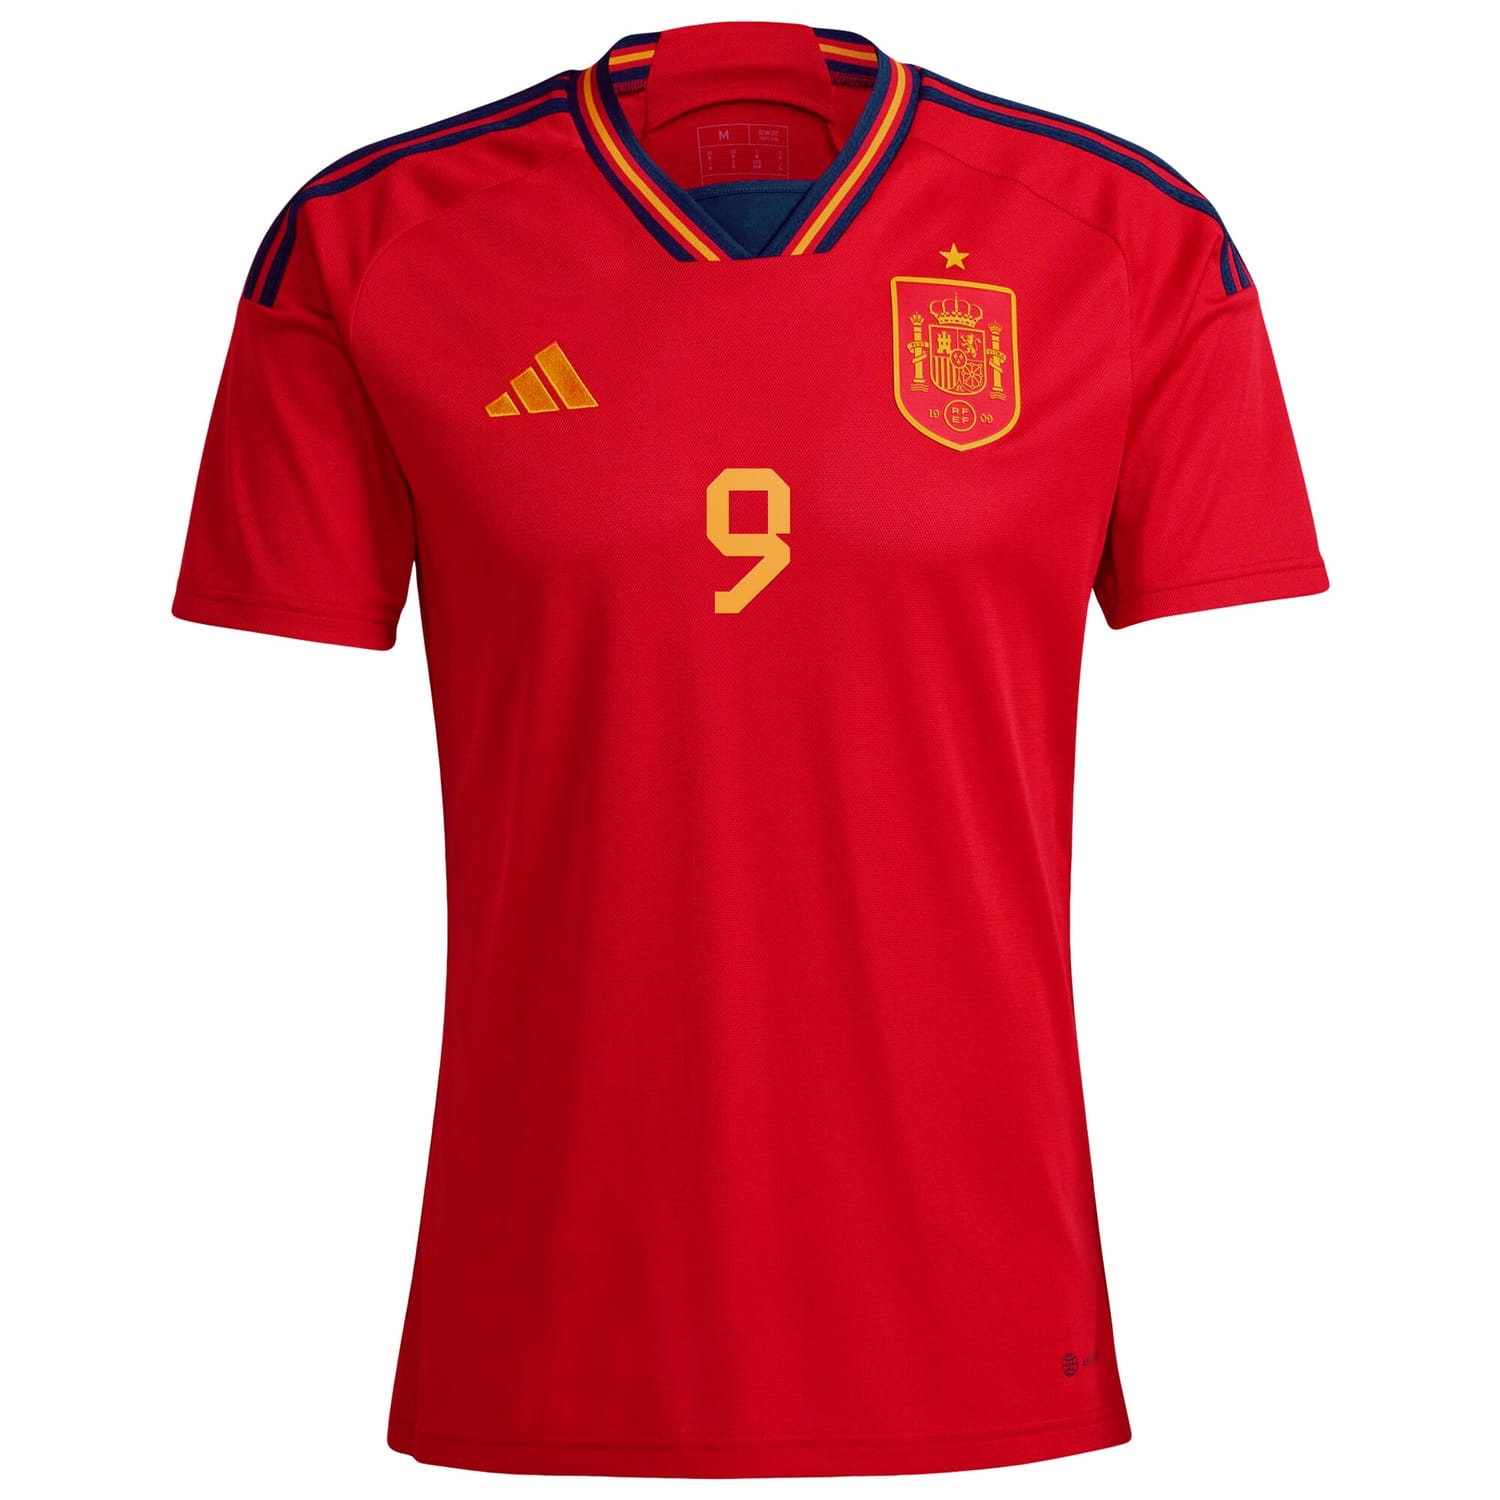 Spain National Team Home Jersey Shirt Red 2022-23 player Gavi printing for Men